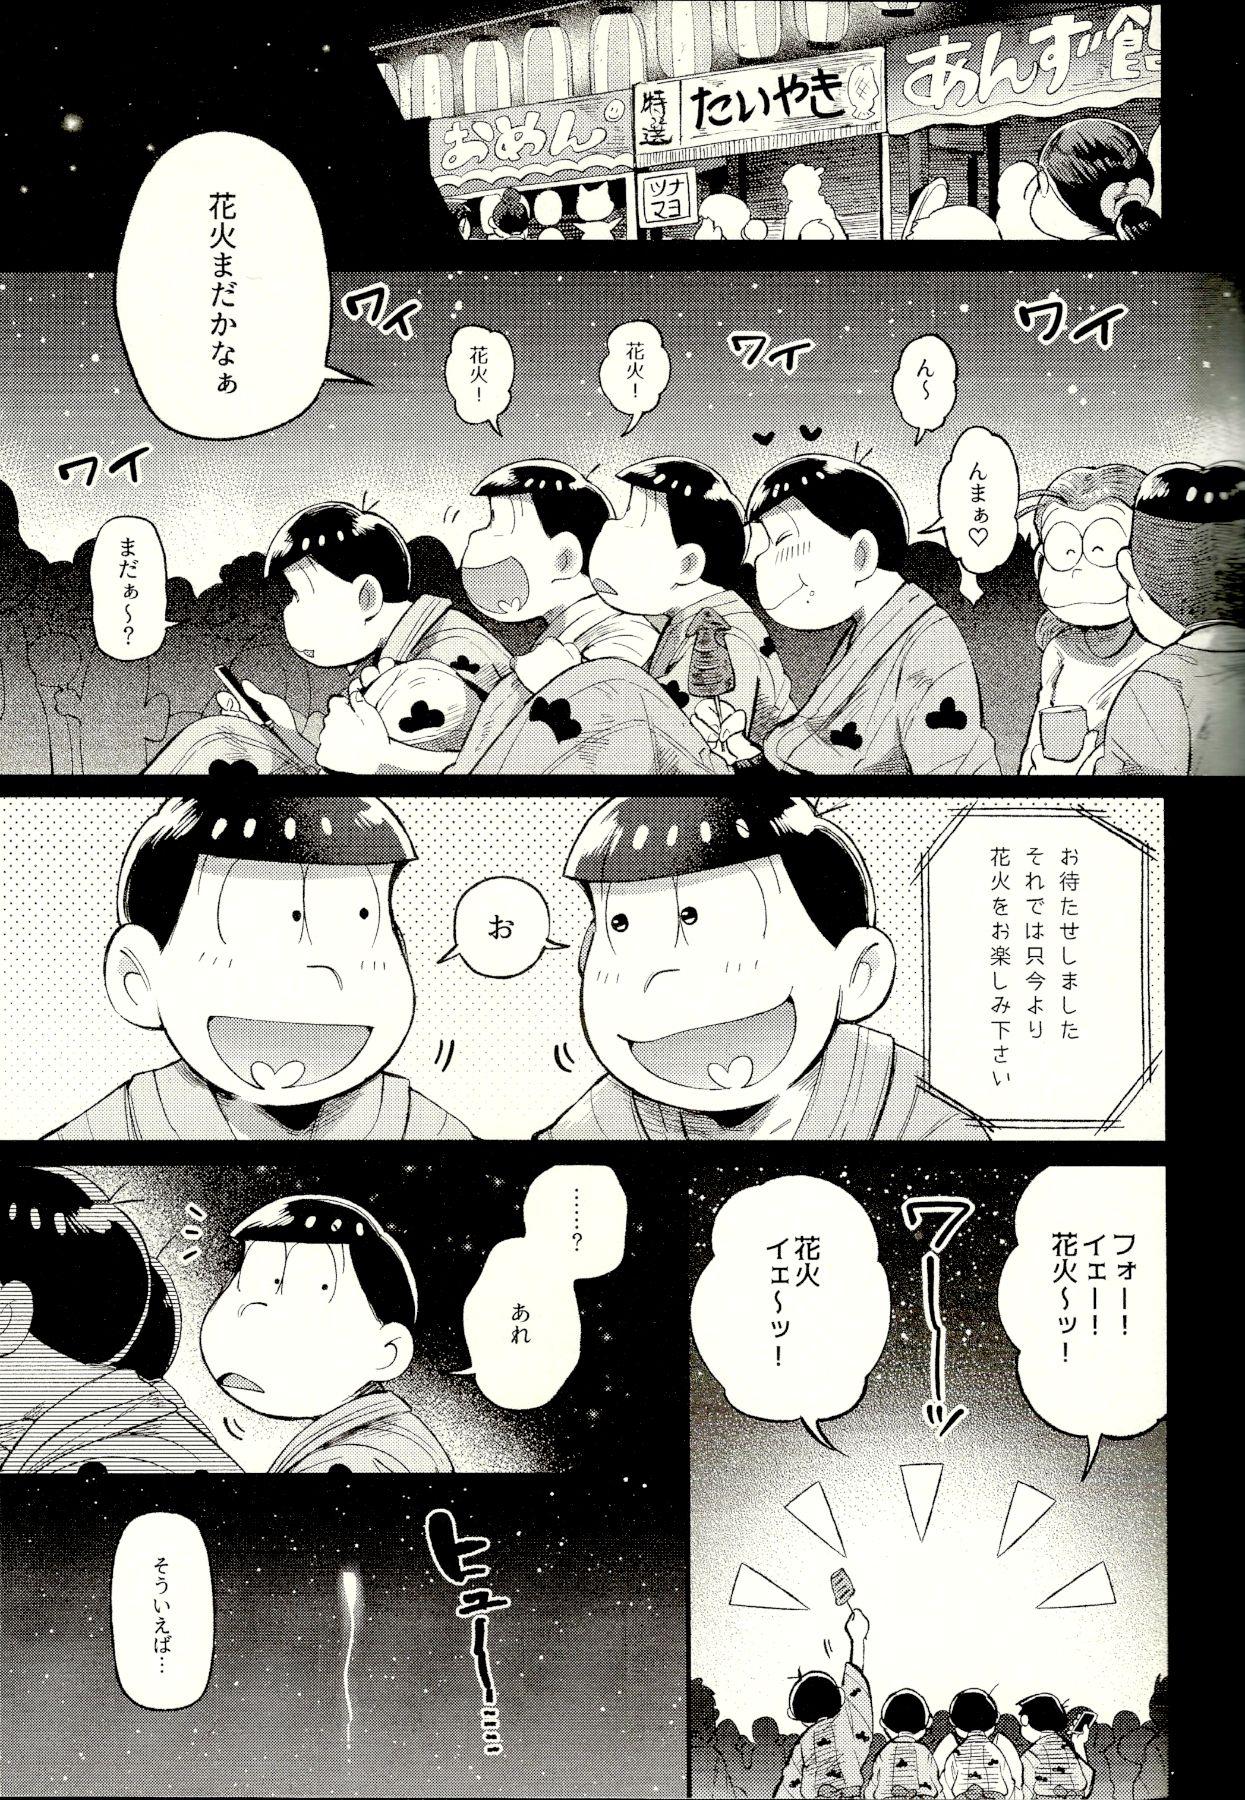 Punished Season in the Summer - Osomatsu-san Yanks Featured - Page 3